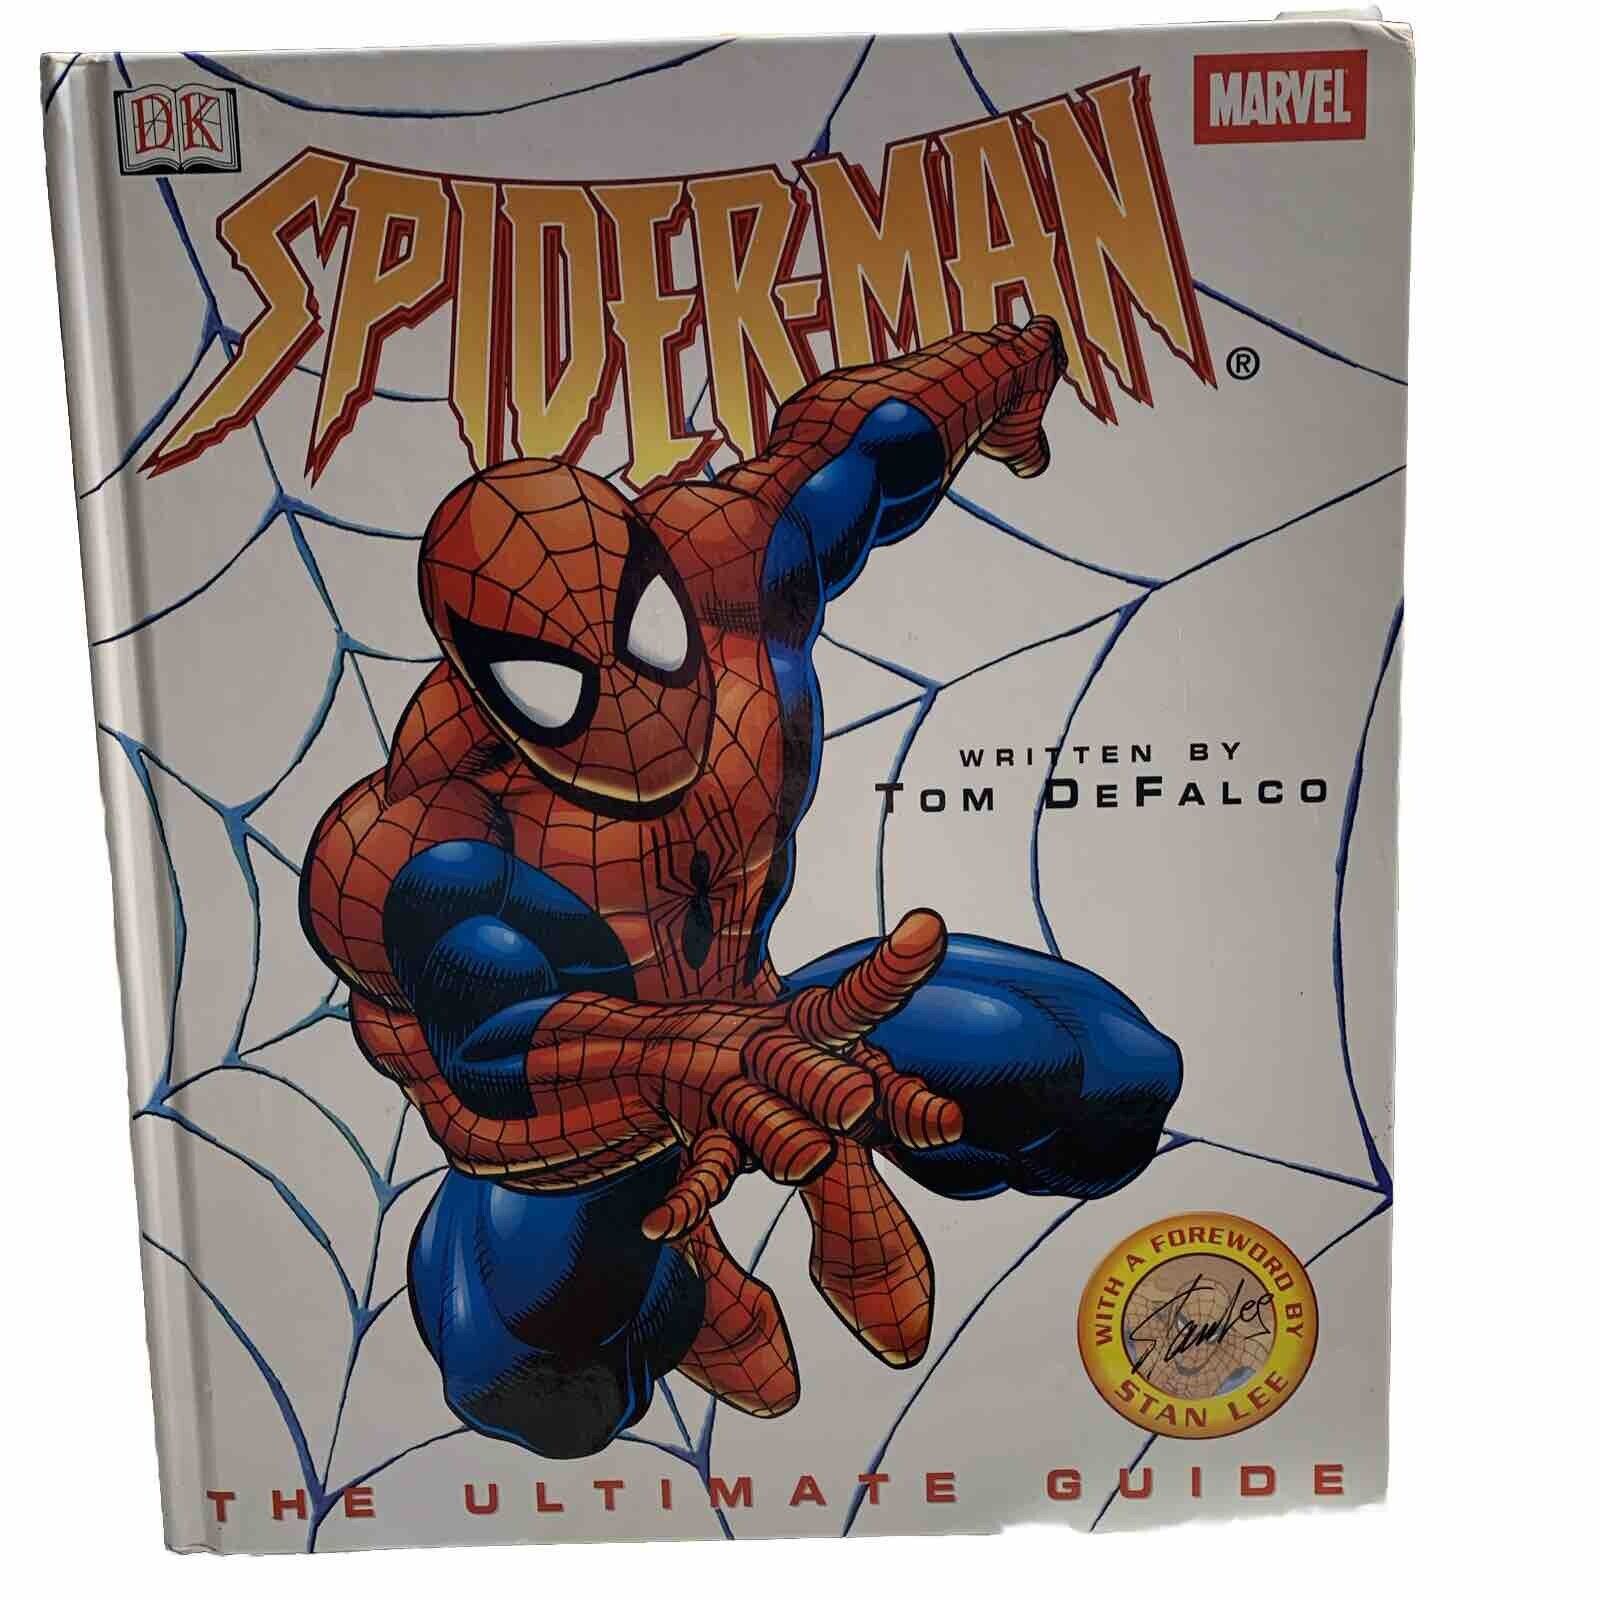 Spider-man: The Ultimate Guide by Tom DeFalco Hardback Book brilliant Marvel